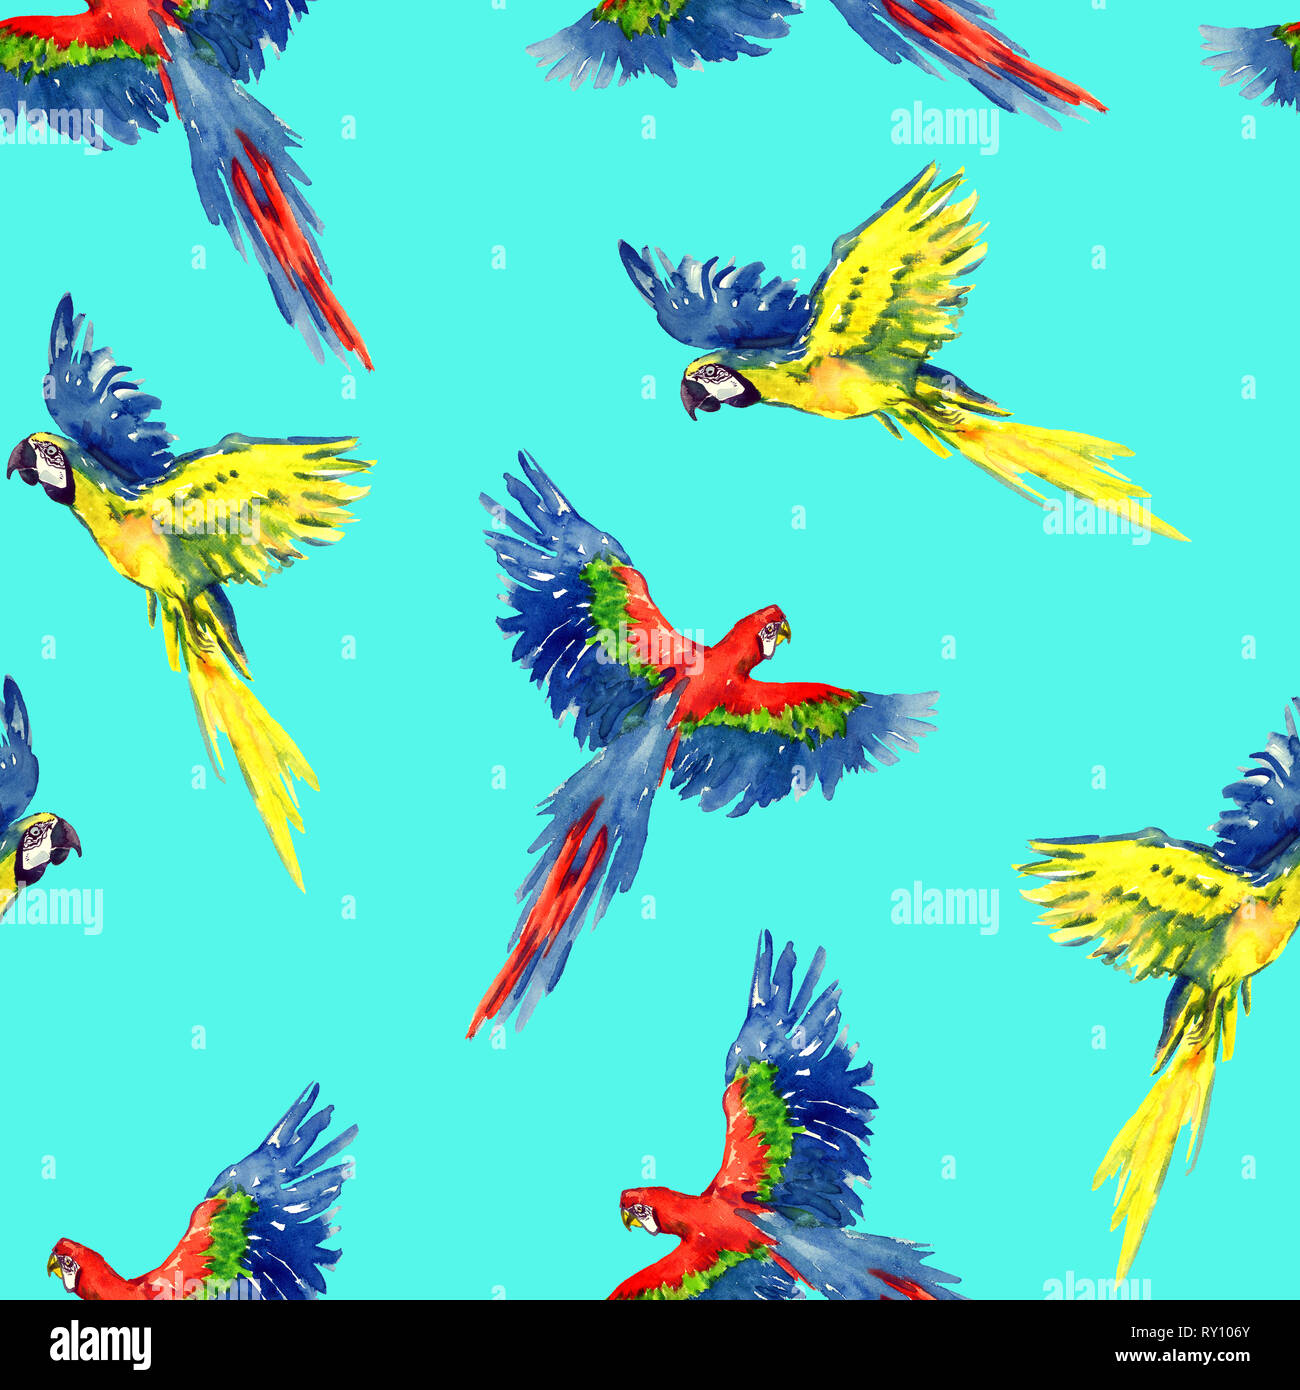 Blue and yellow and Scarlet macaw flying, seamless pattern design, hand painted watercolor illustration, green background Stock Photo